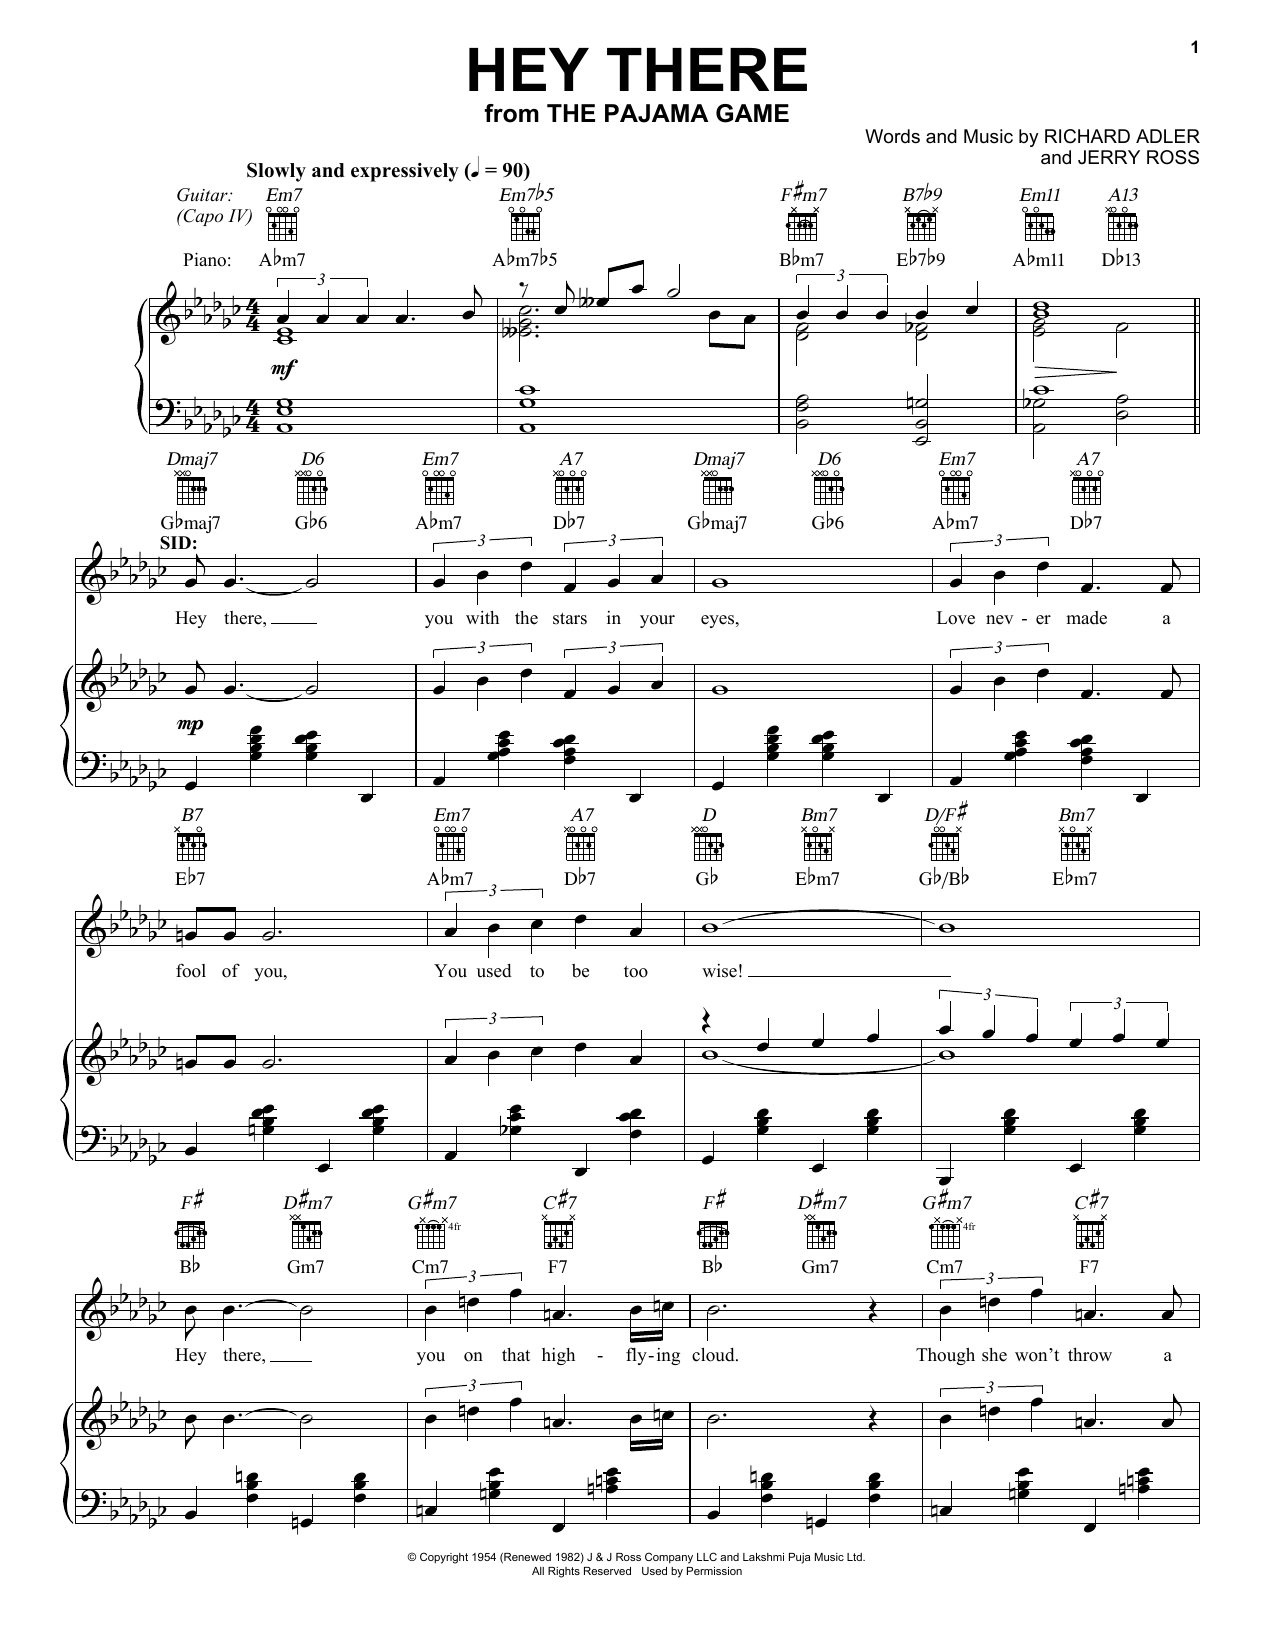 Download Richard Adler Hey There Sheet Music